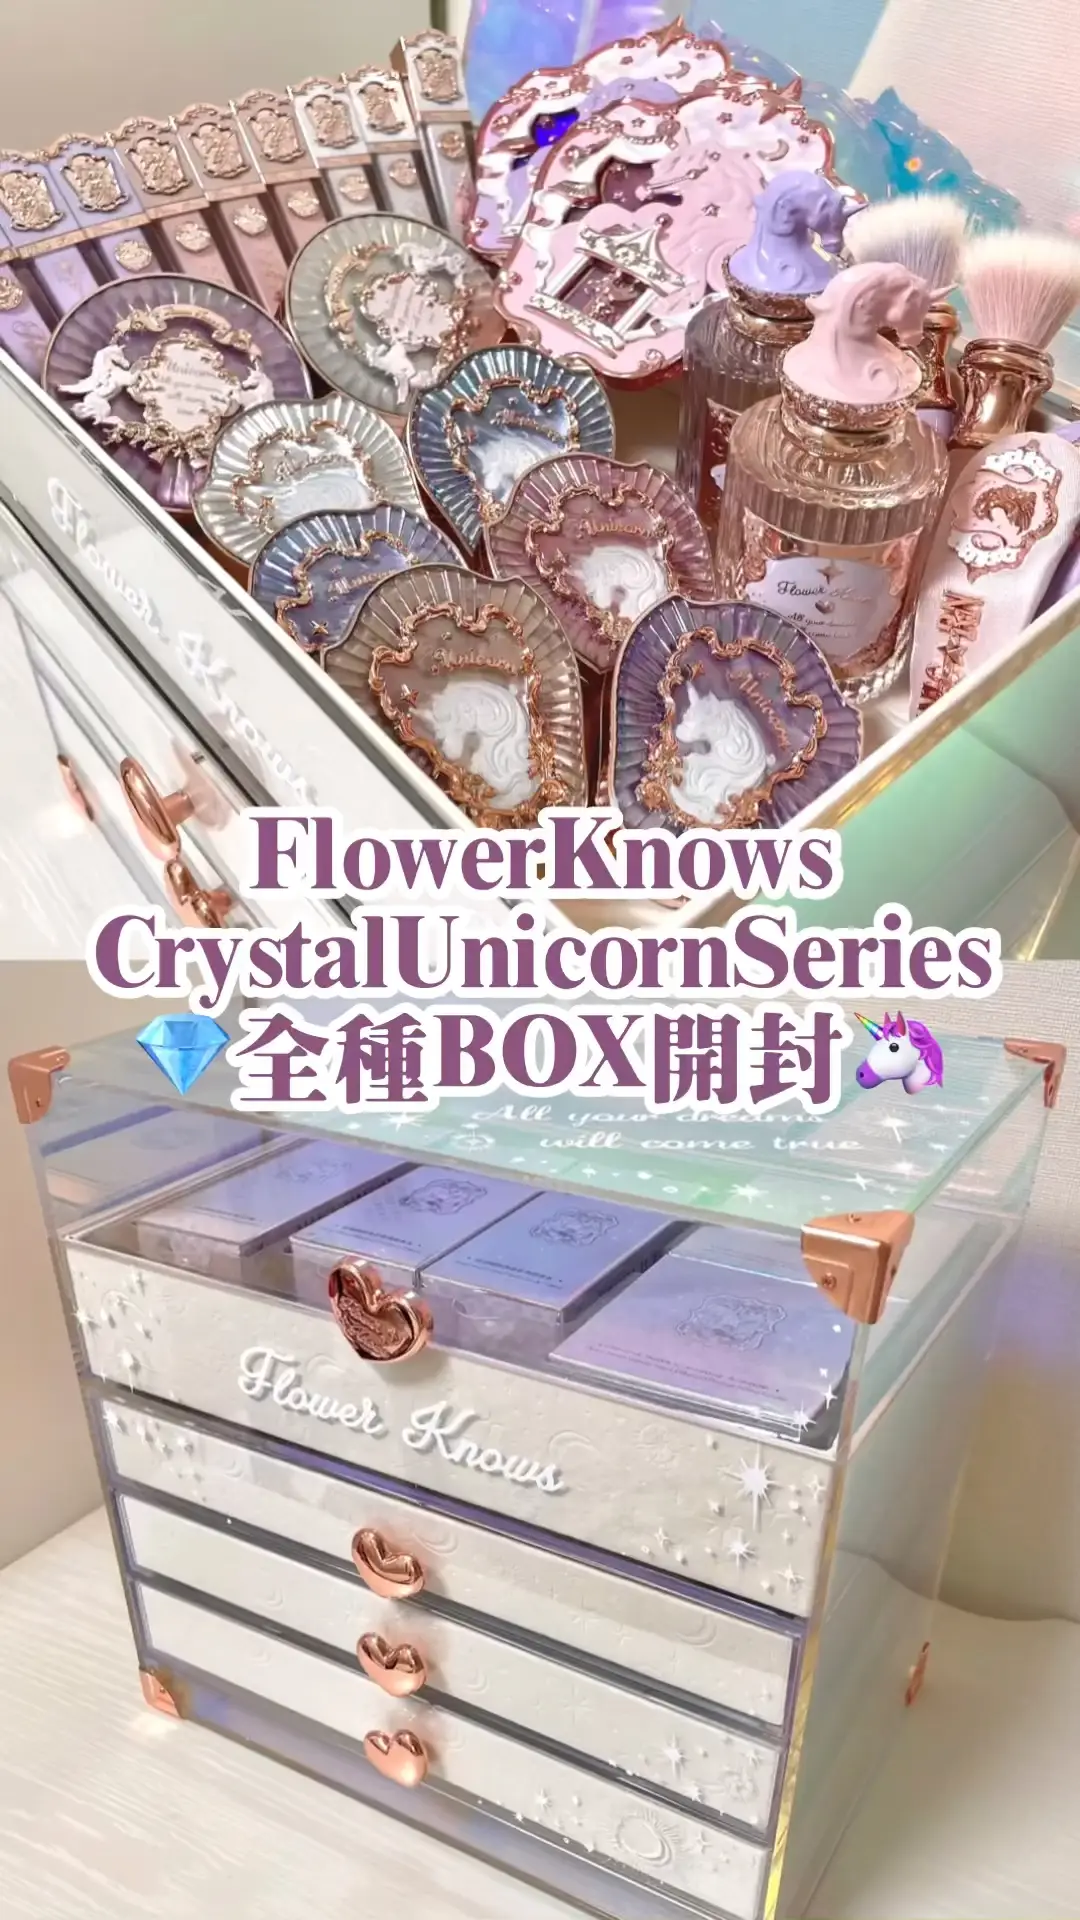 flowerKnows チョコレートシリーズ All inボックス - その他